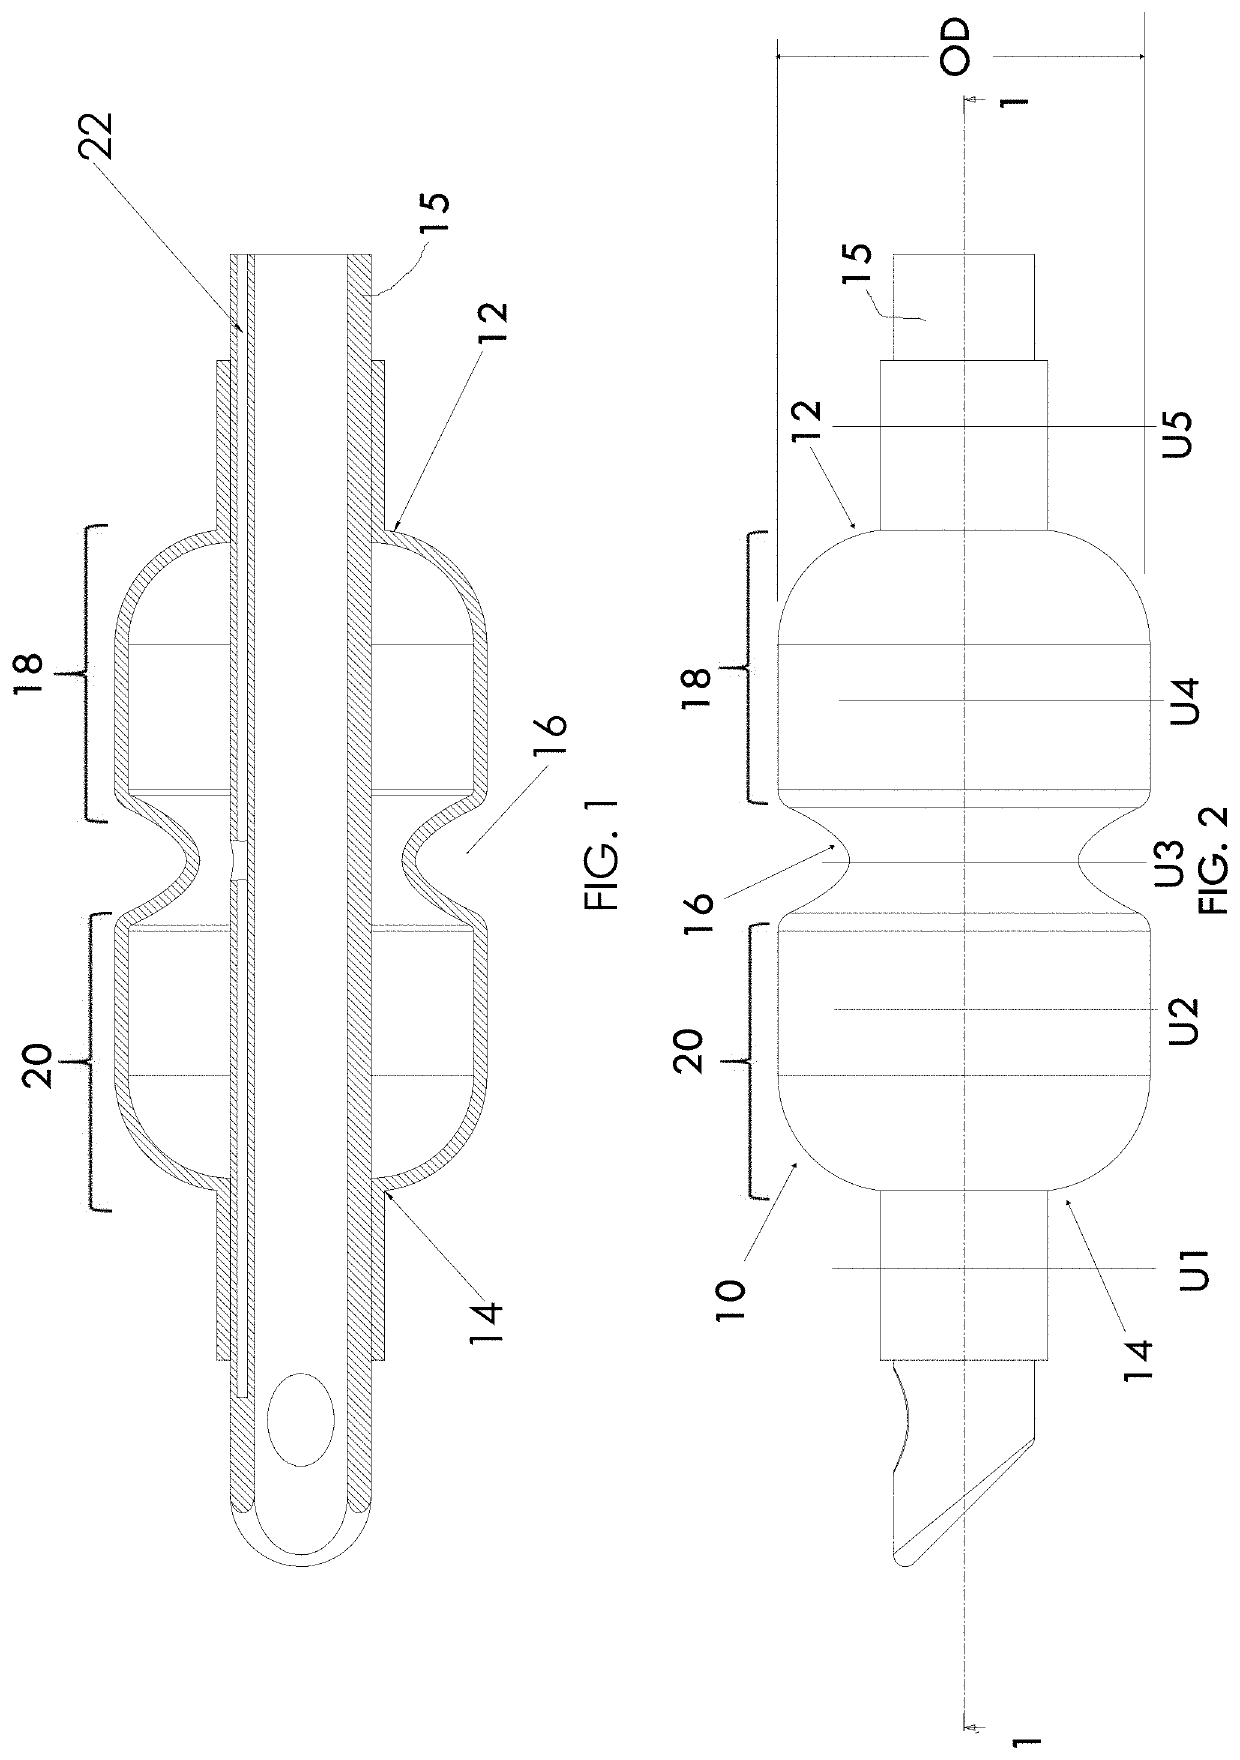 Repositionable medical tube with ultrasonically-detectable cuff